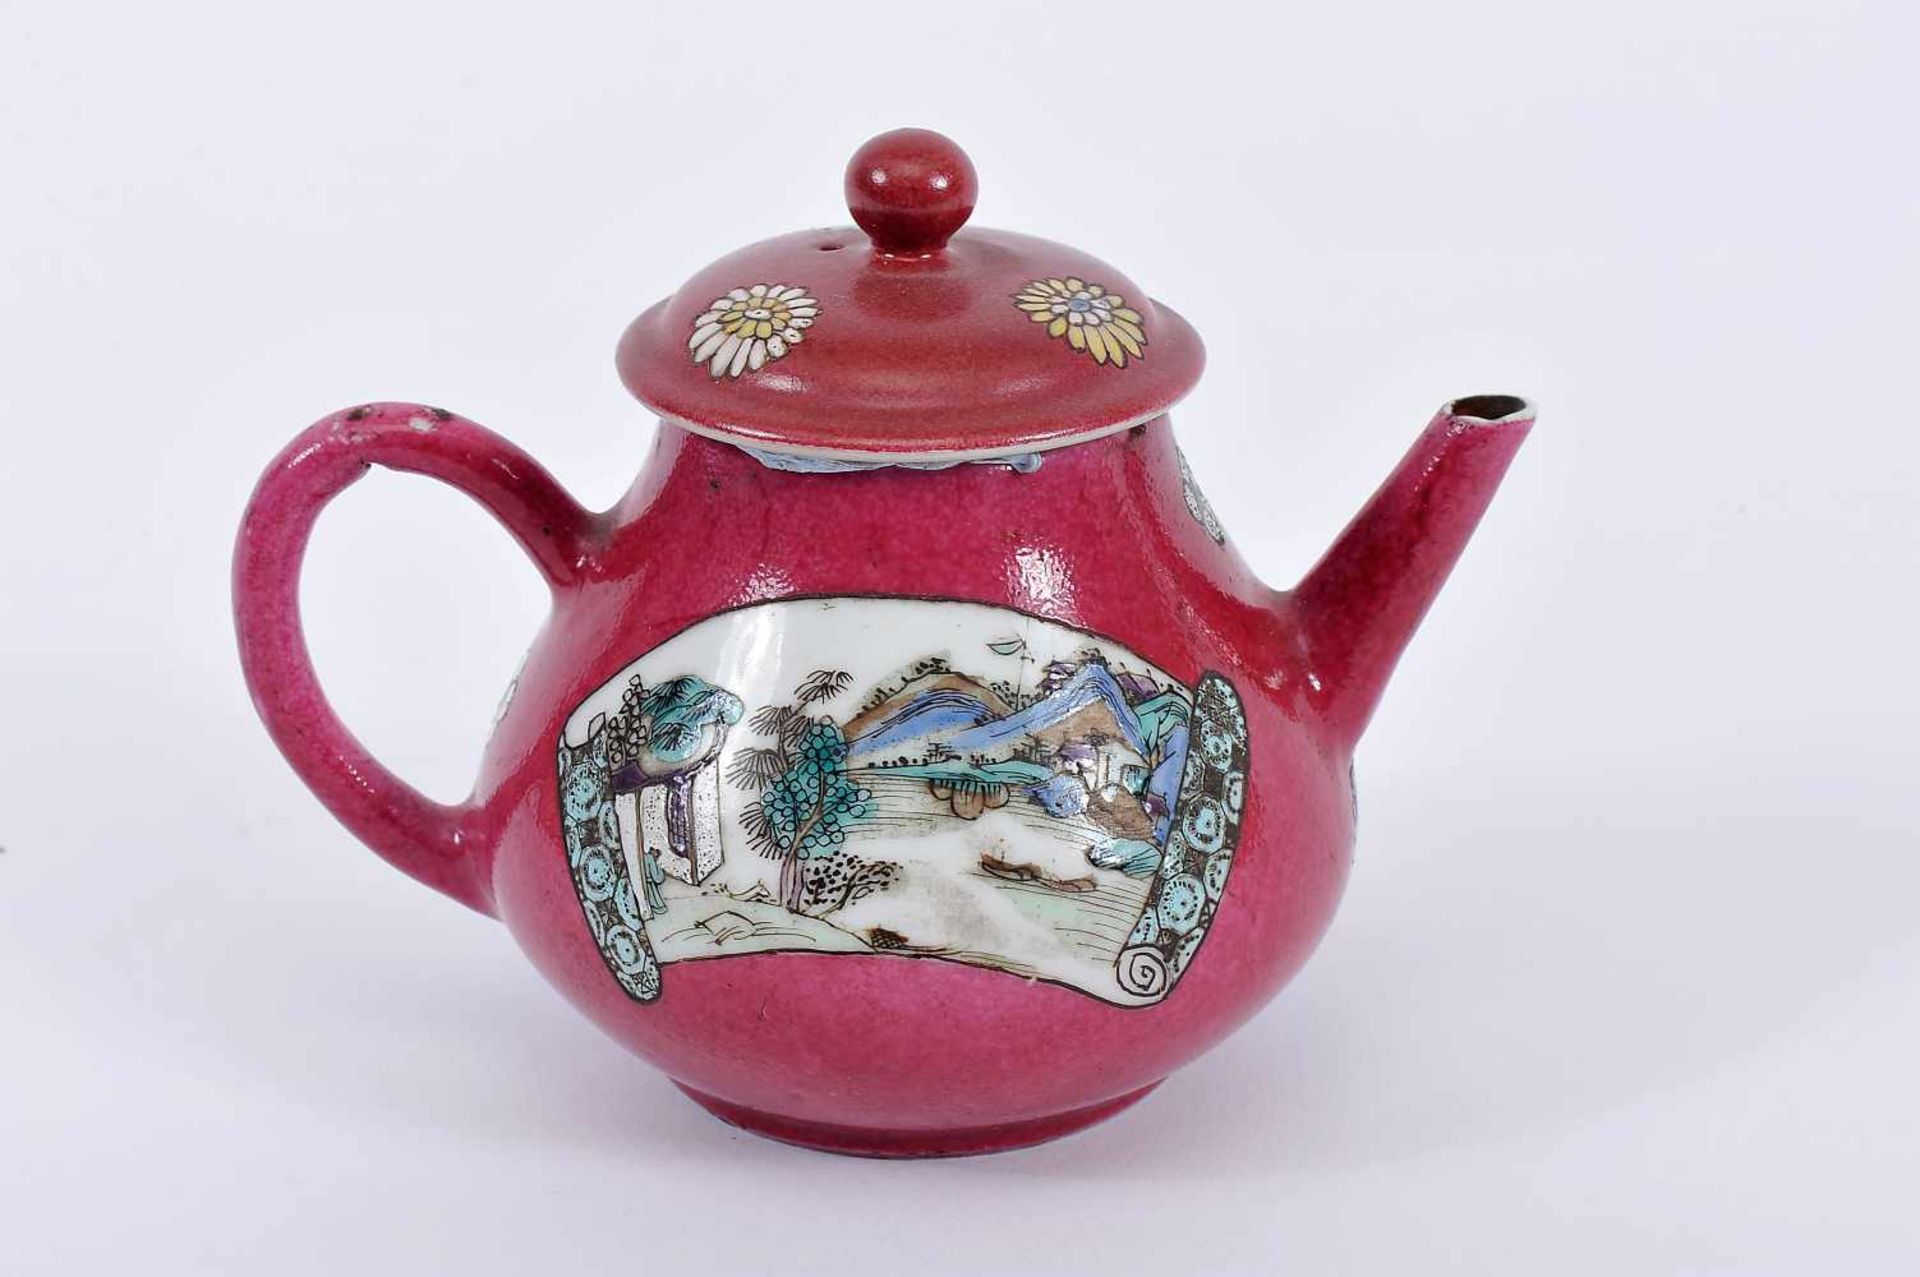 A Teapot, Chinese export porcelain, "ruby" decoration with polychrome reserves "Oriental